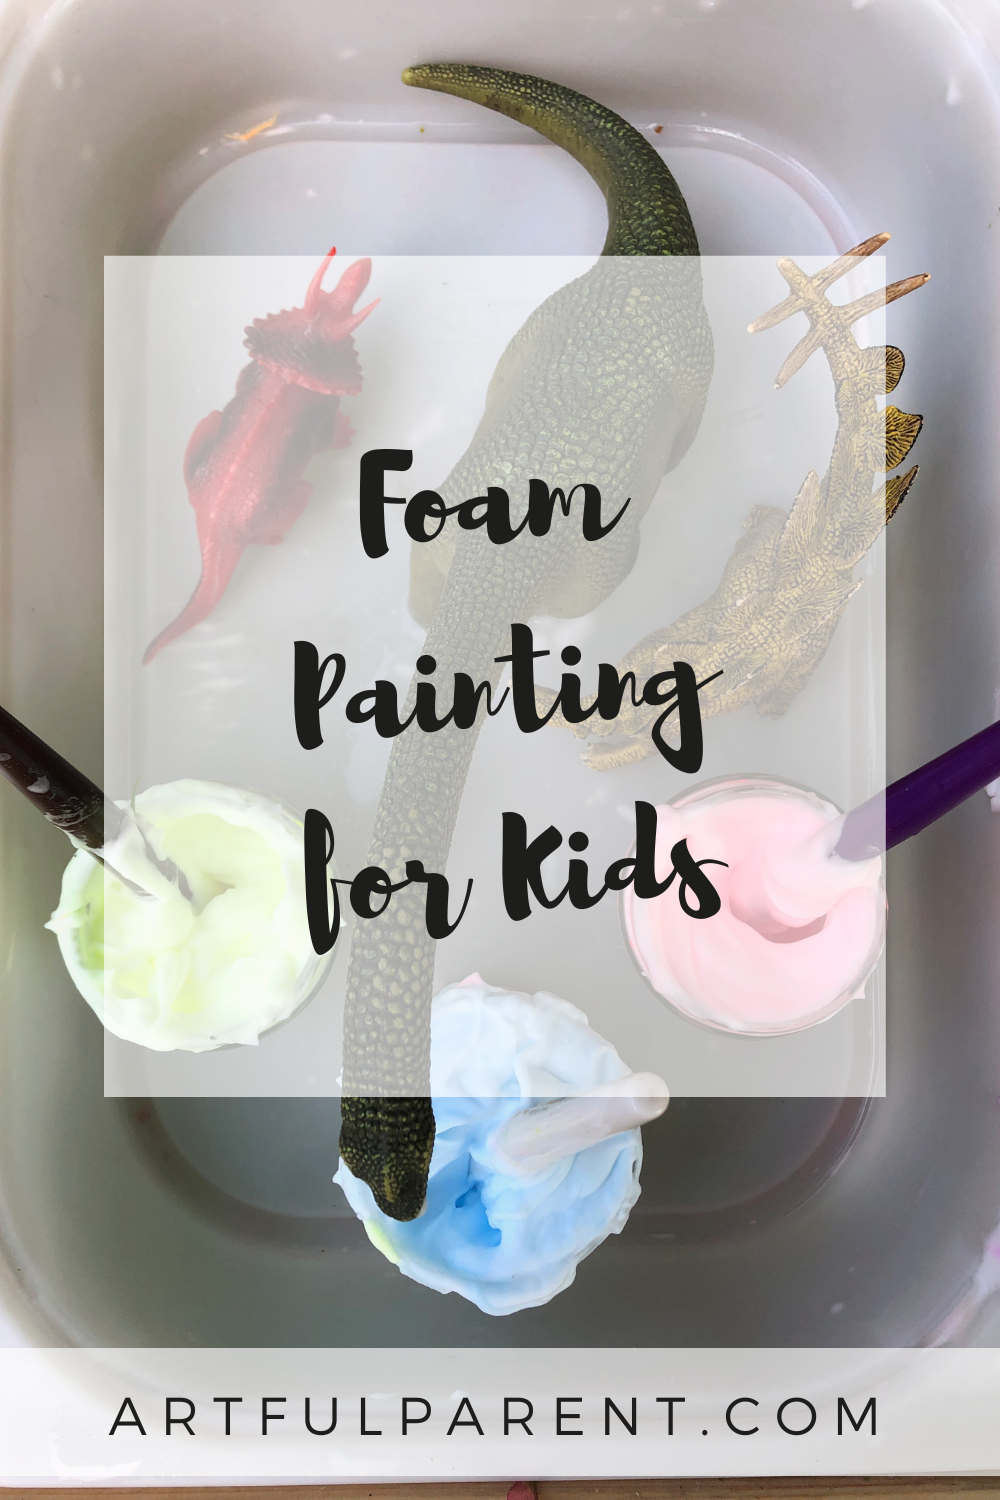 How to Do Foam Painting for Kids